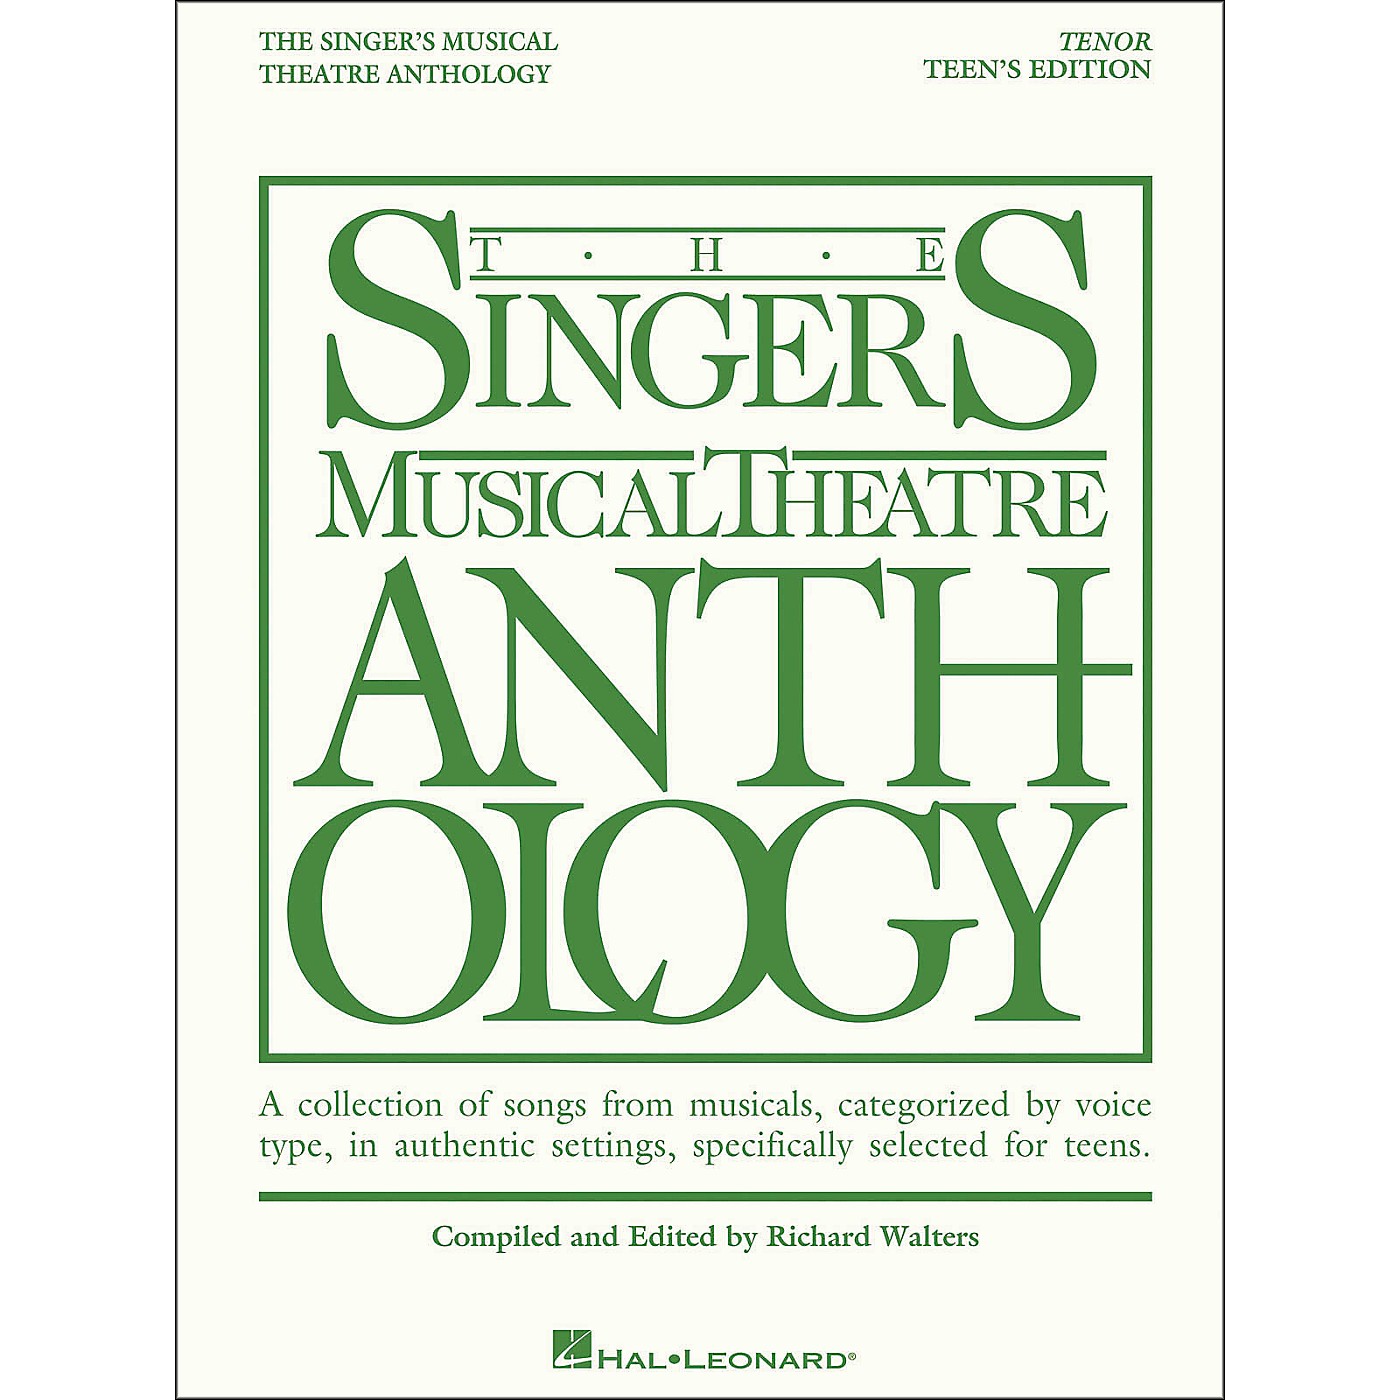 Hal Leonard The Singer's Musical Theatre Anthology Teen's Edition Tenor thumbnail